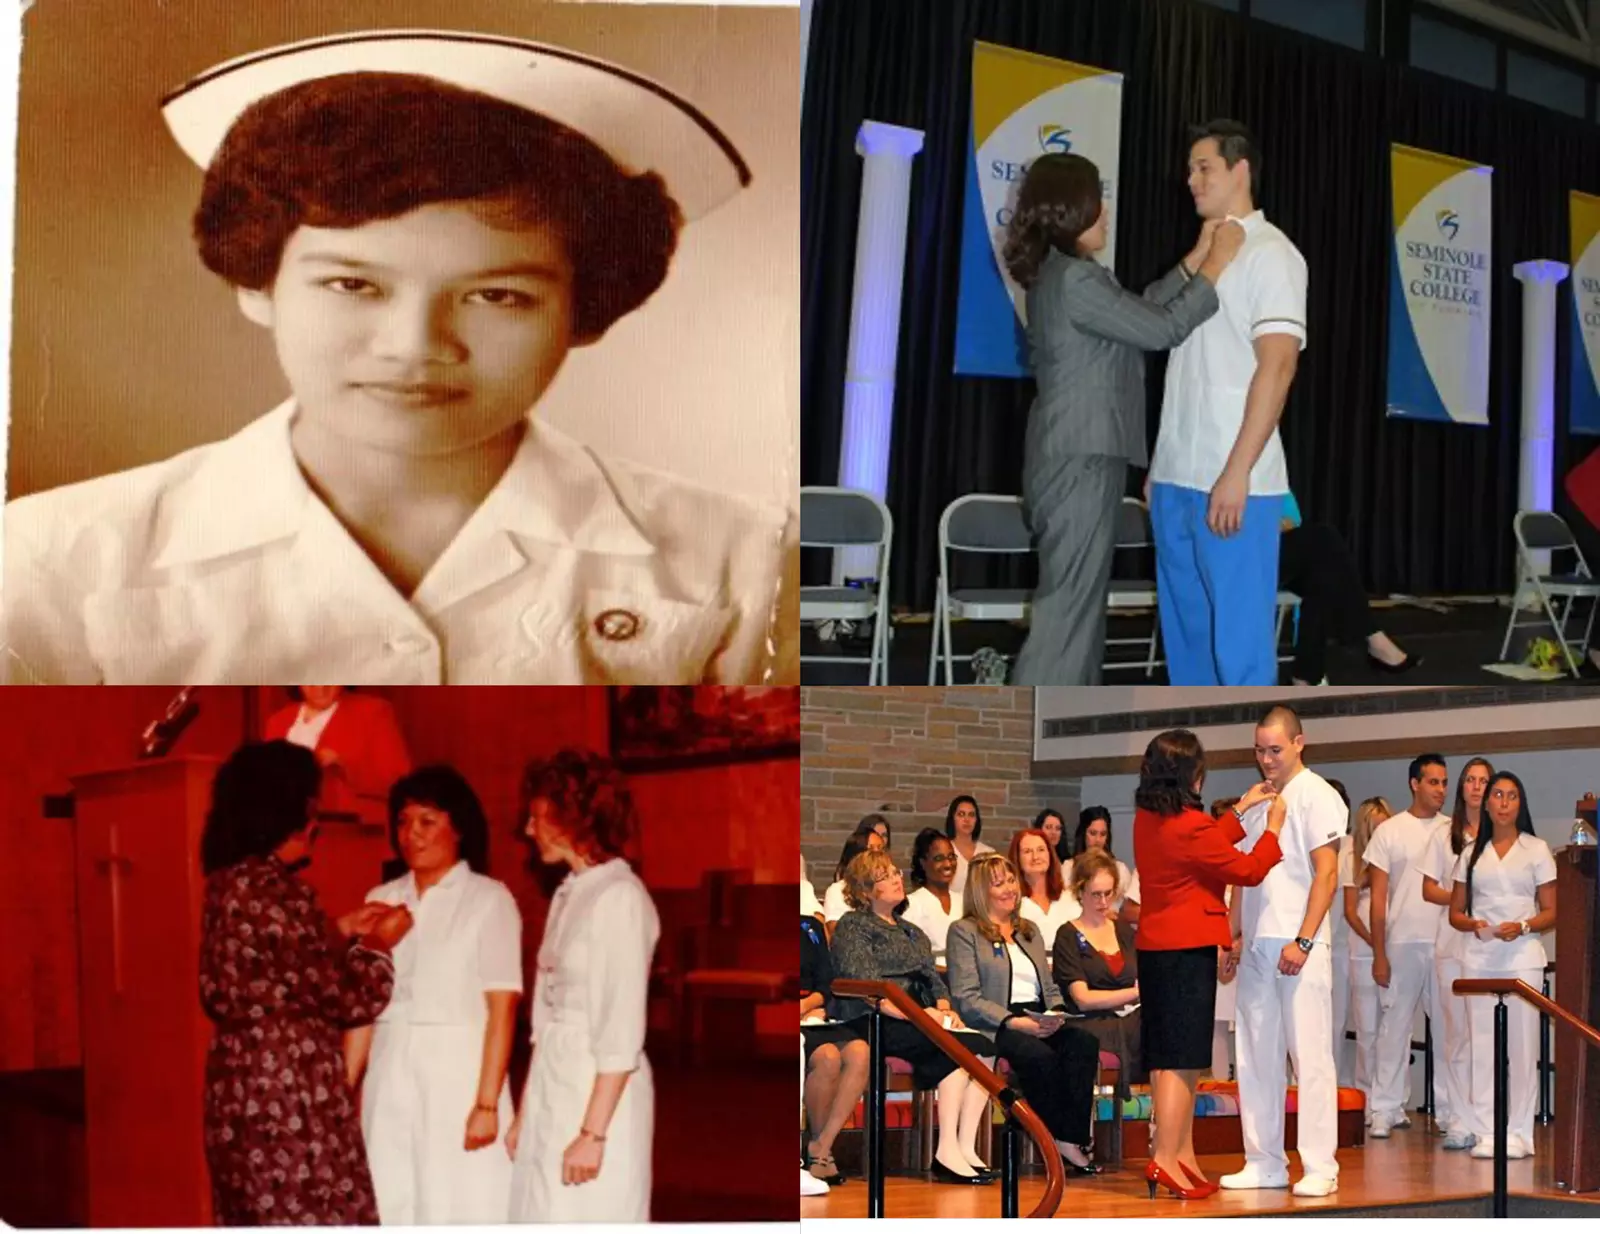 The photo grid shows a series of pinning ceremony events, including Lowe’s mother pinning her as well as Lowe pinning her two sons.